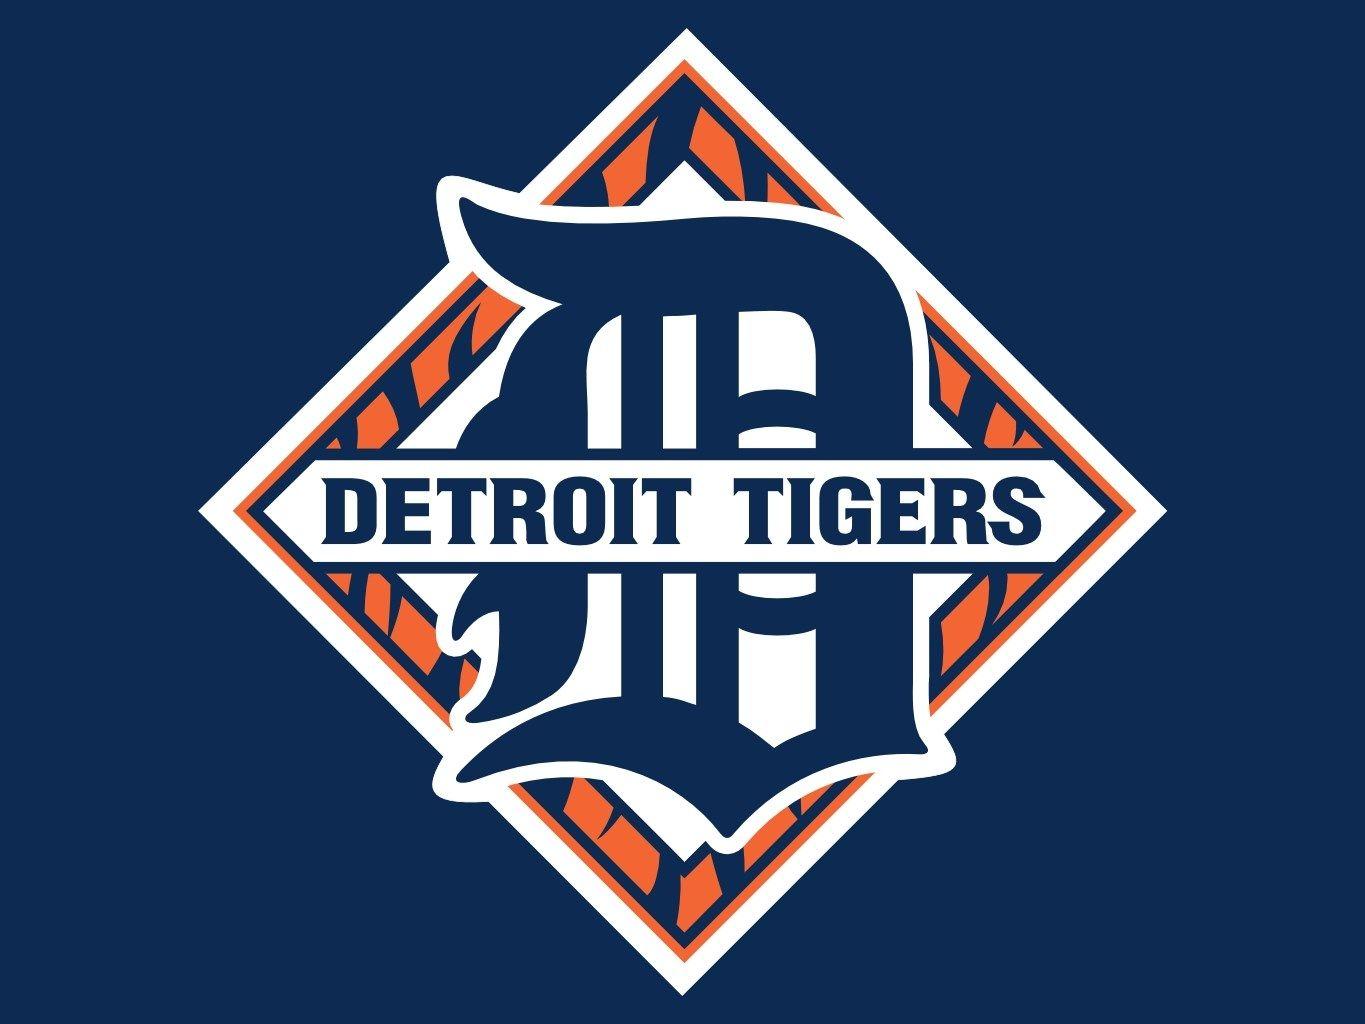 Wallpaper Free Detroit Tigers By Crawford Smith (2017 03 04)